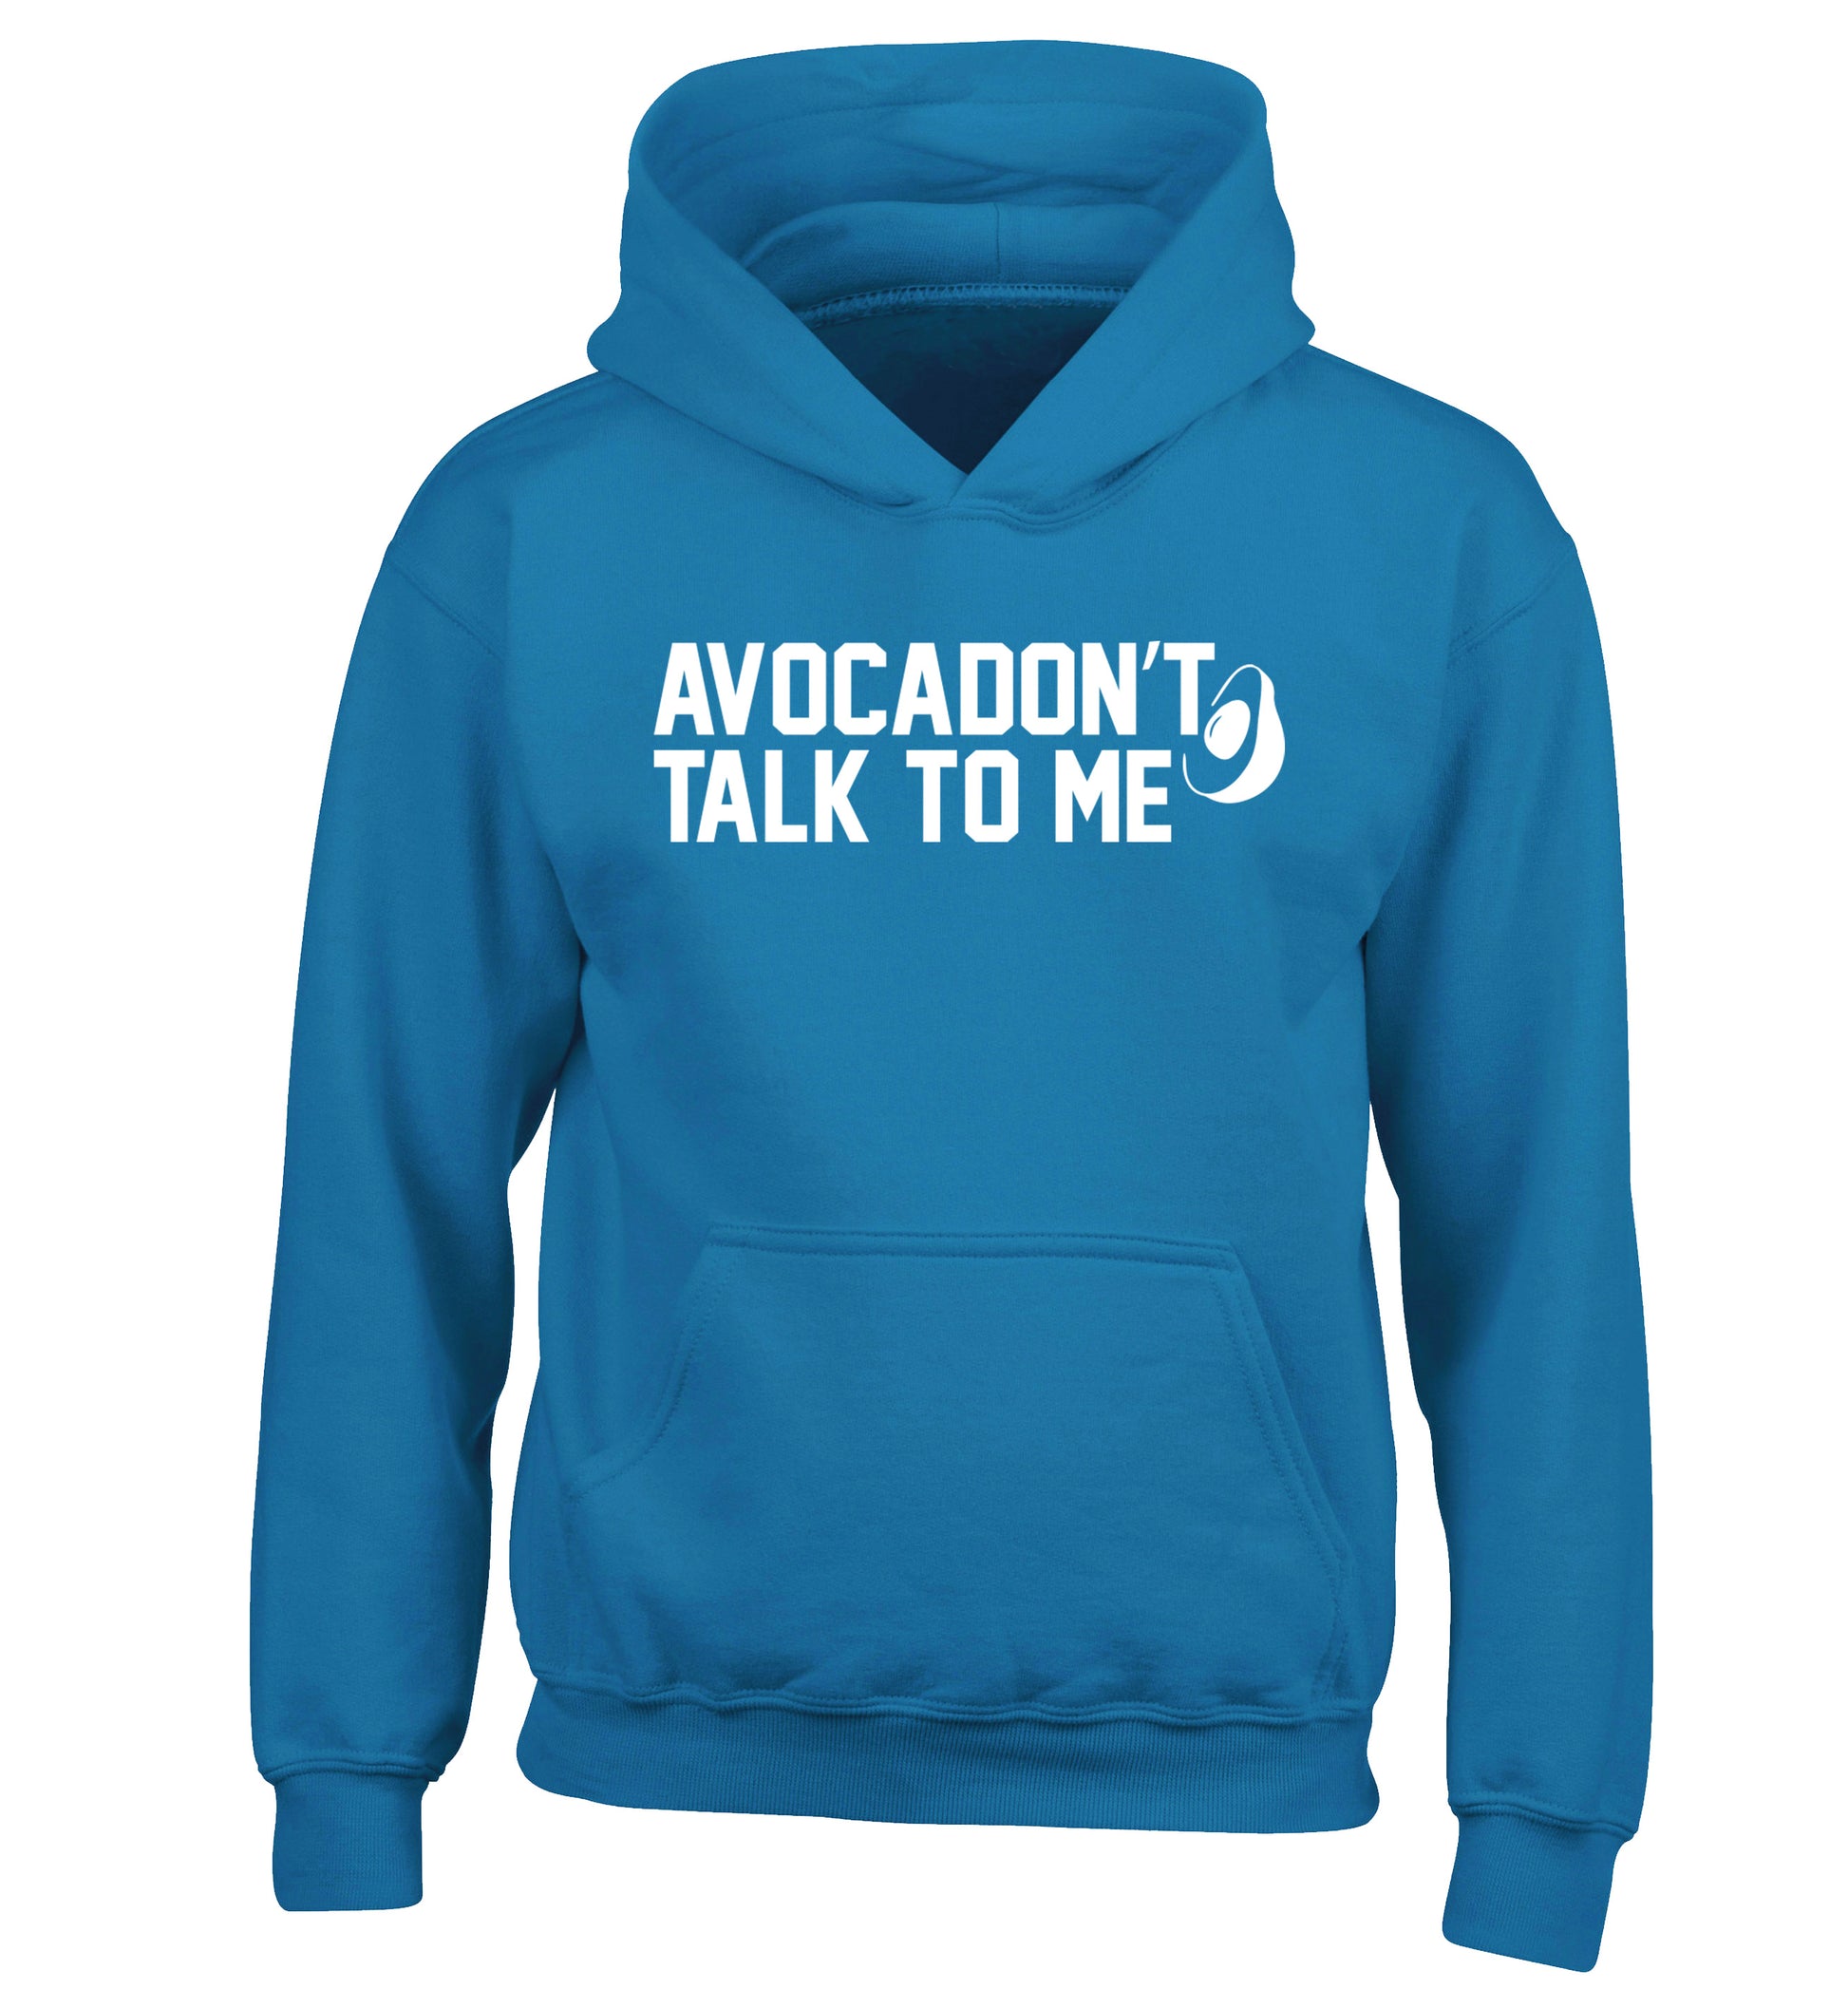 Avocadon't talk to me children's blue hoodie 12-14 Years